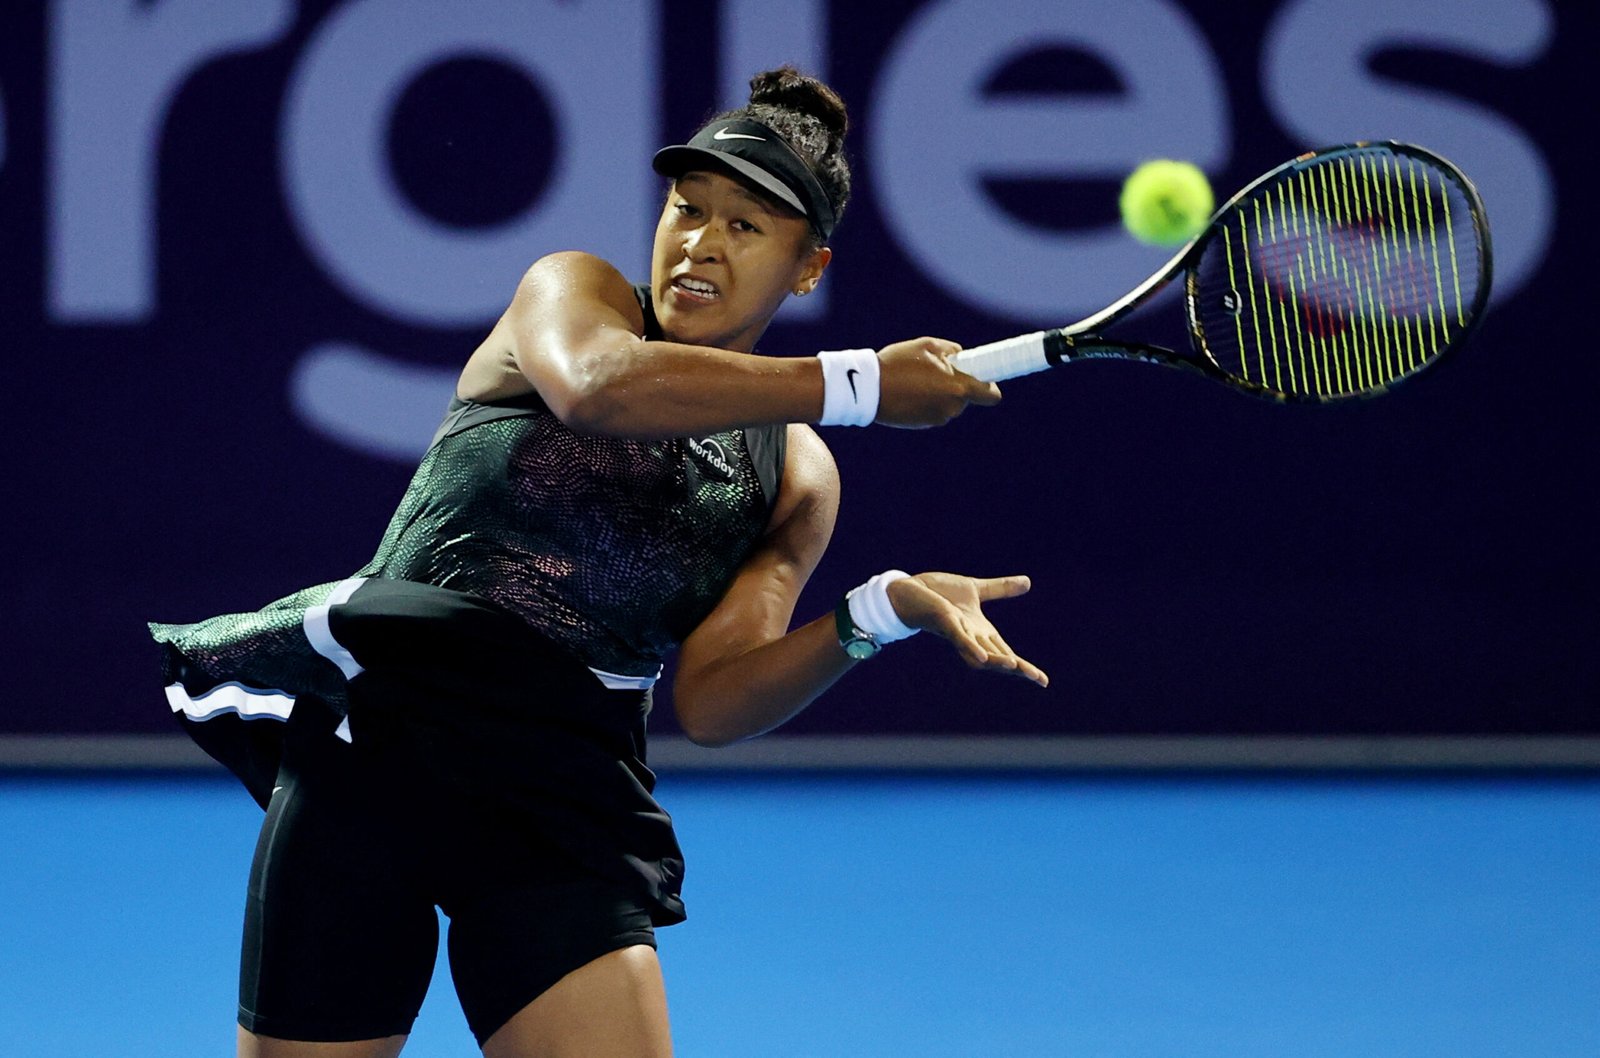 Naomi Osaka hopes for better returns after copying Djokovic style